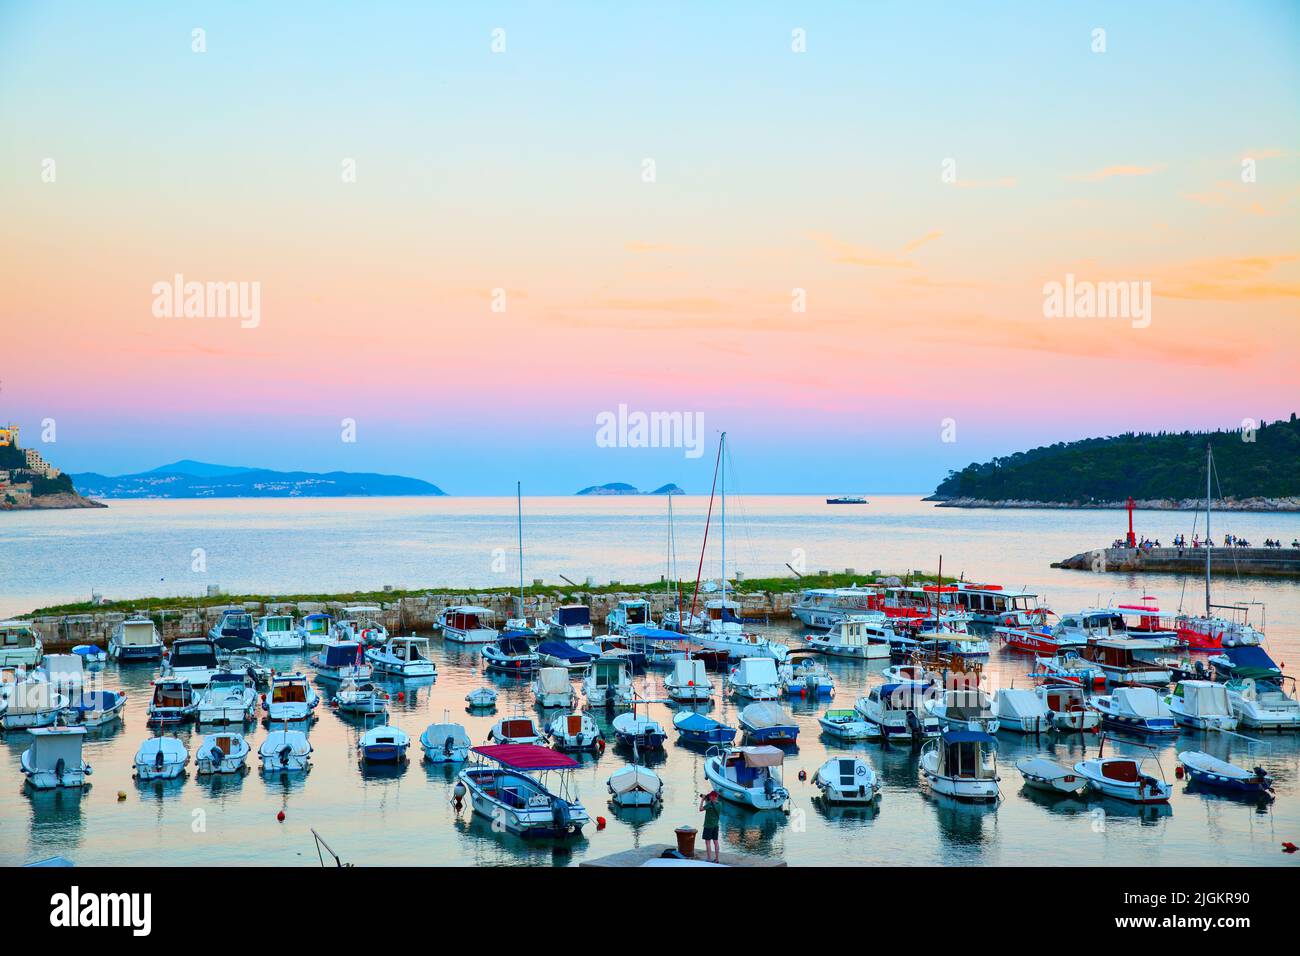 Dubrovnik, Croatia - June 12, 2017: Marina with lots of various boats by the Old Town of Dubrovnik Stock Photo